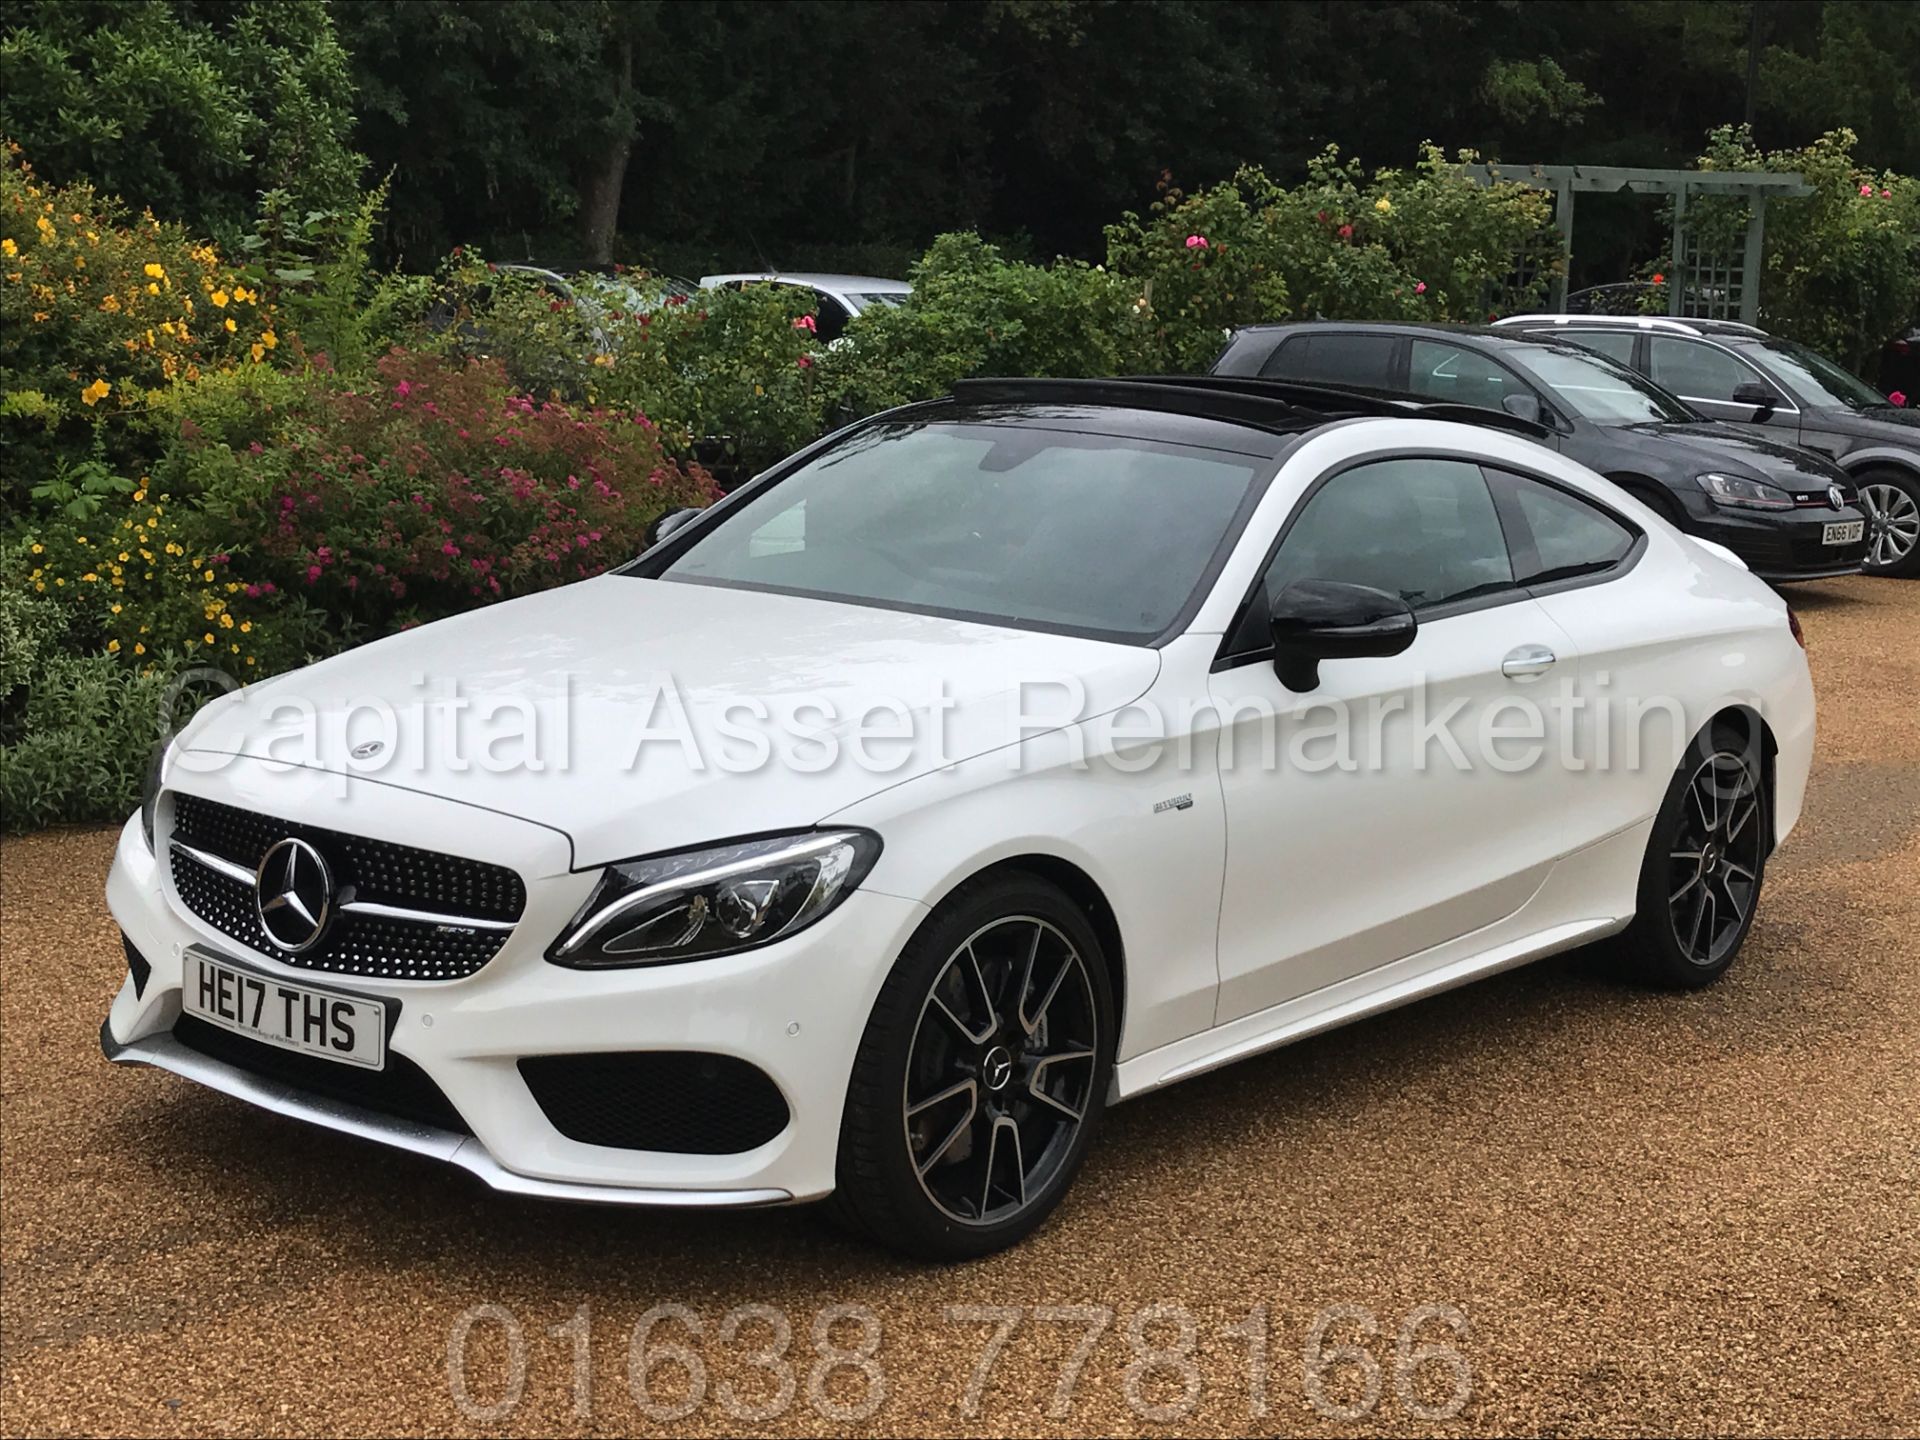 MEREDES-BENZ C43 AMG PREMIUM '4 MATIC' COUPE (2017) '9-G AUTO - LEATHER - SAT NAV' **FULLY LOADED** - Image 7 of 57